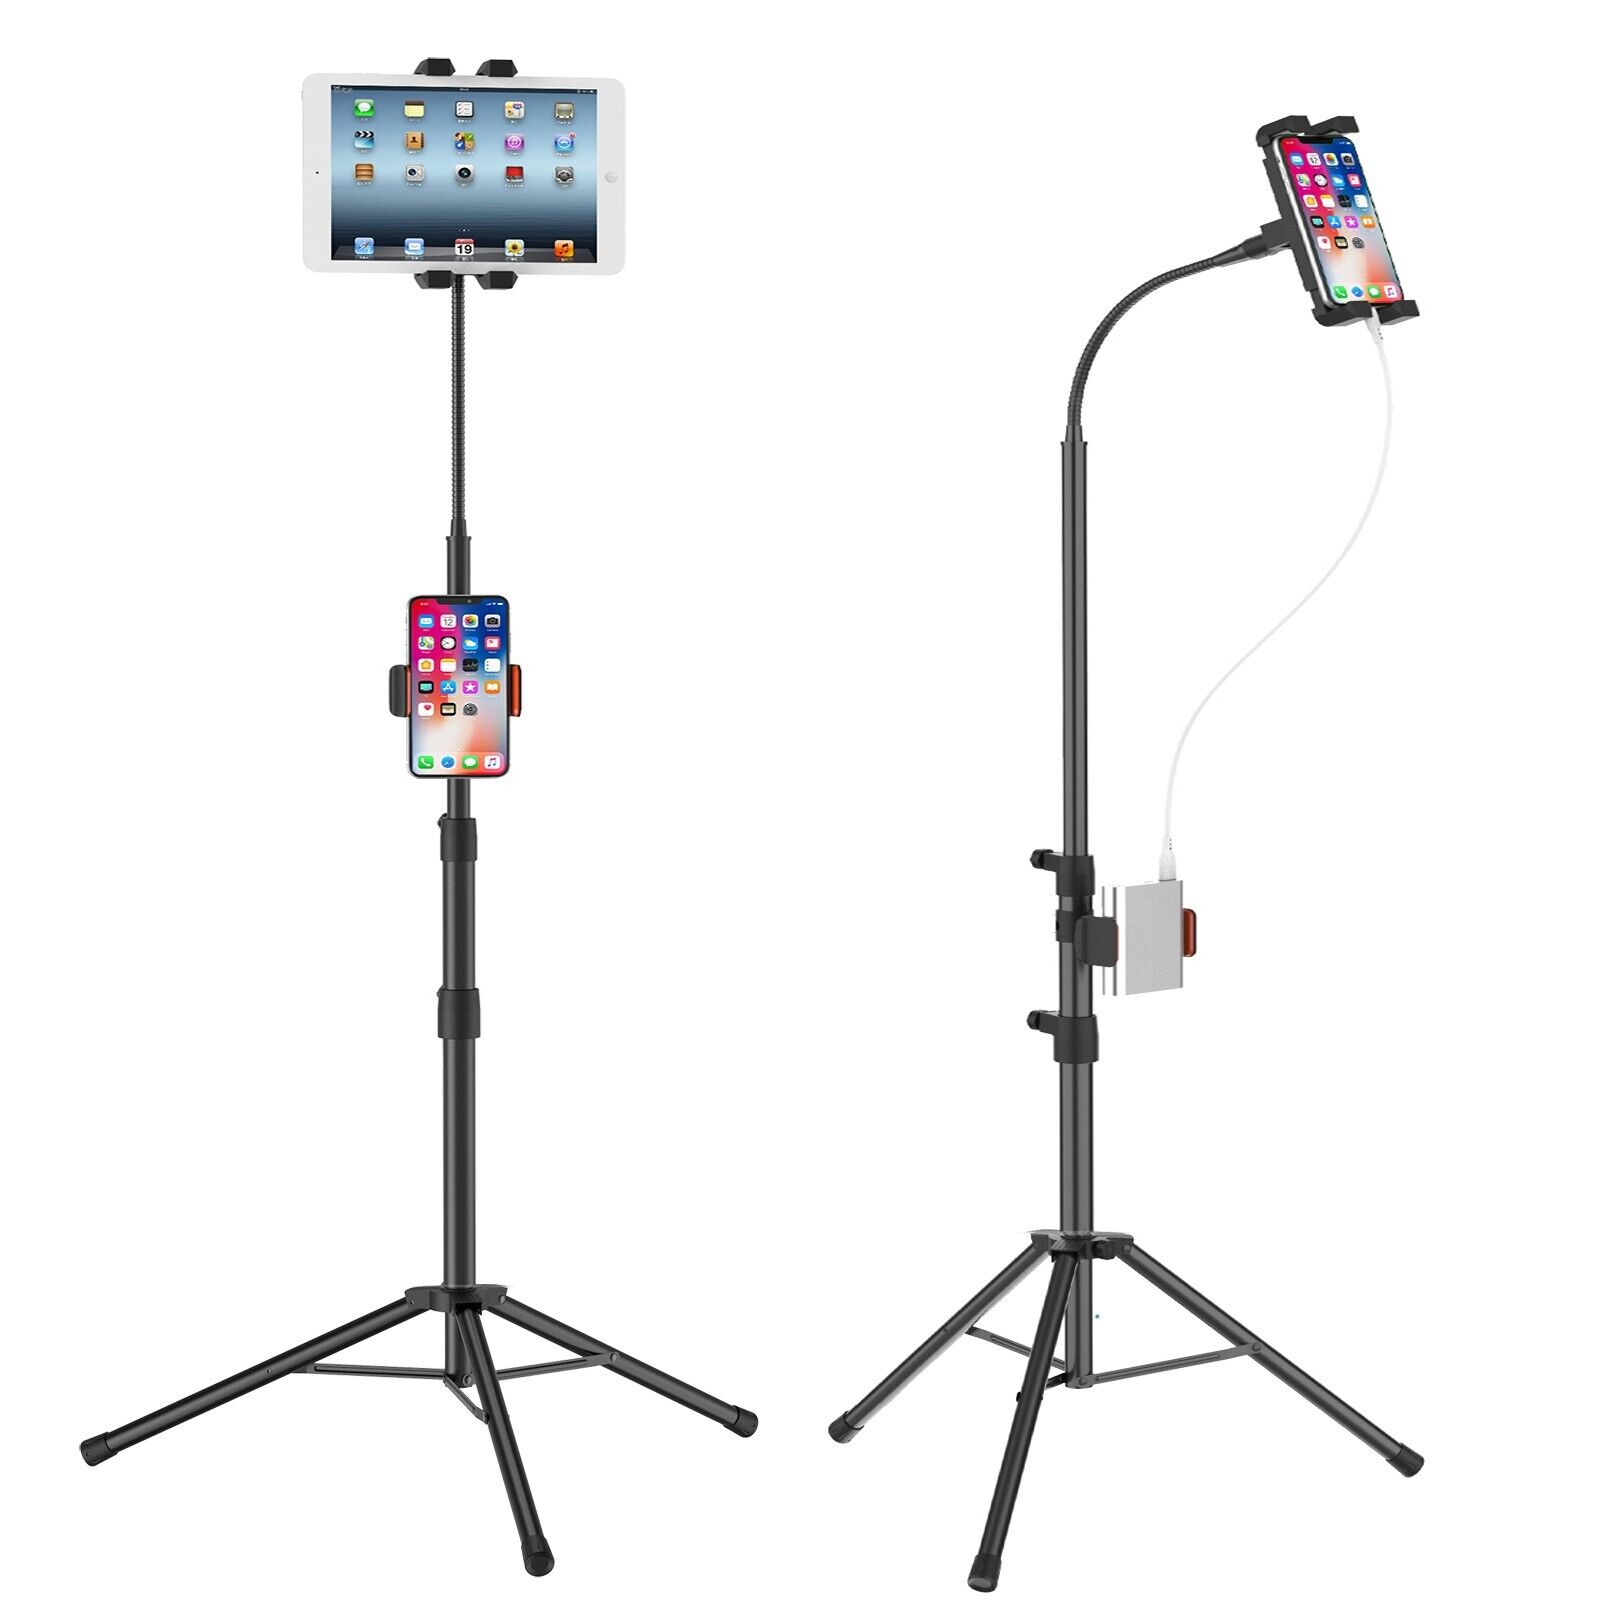 LIUGAST Ipad Tripod Stand,Gooseneck 67-inch Floor Stand for Tablet